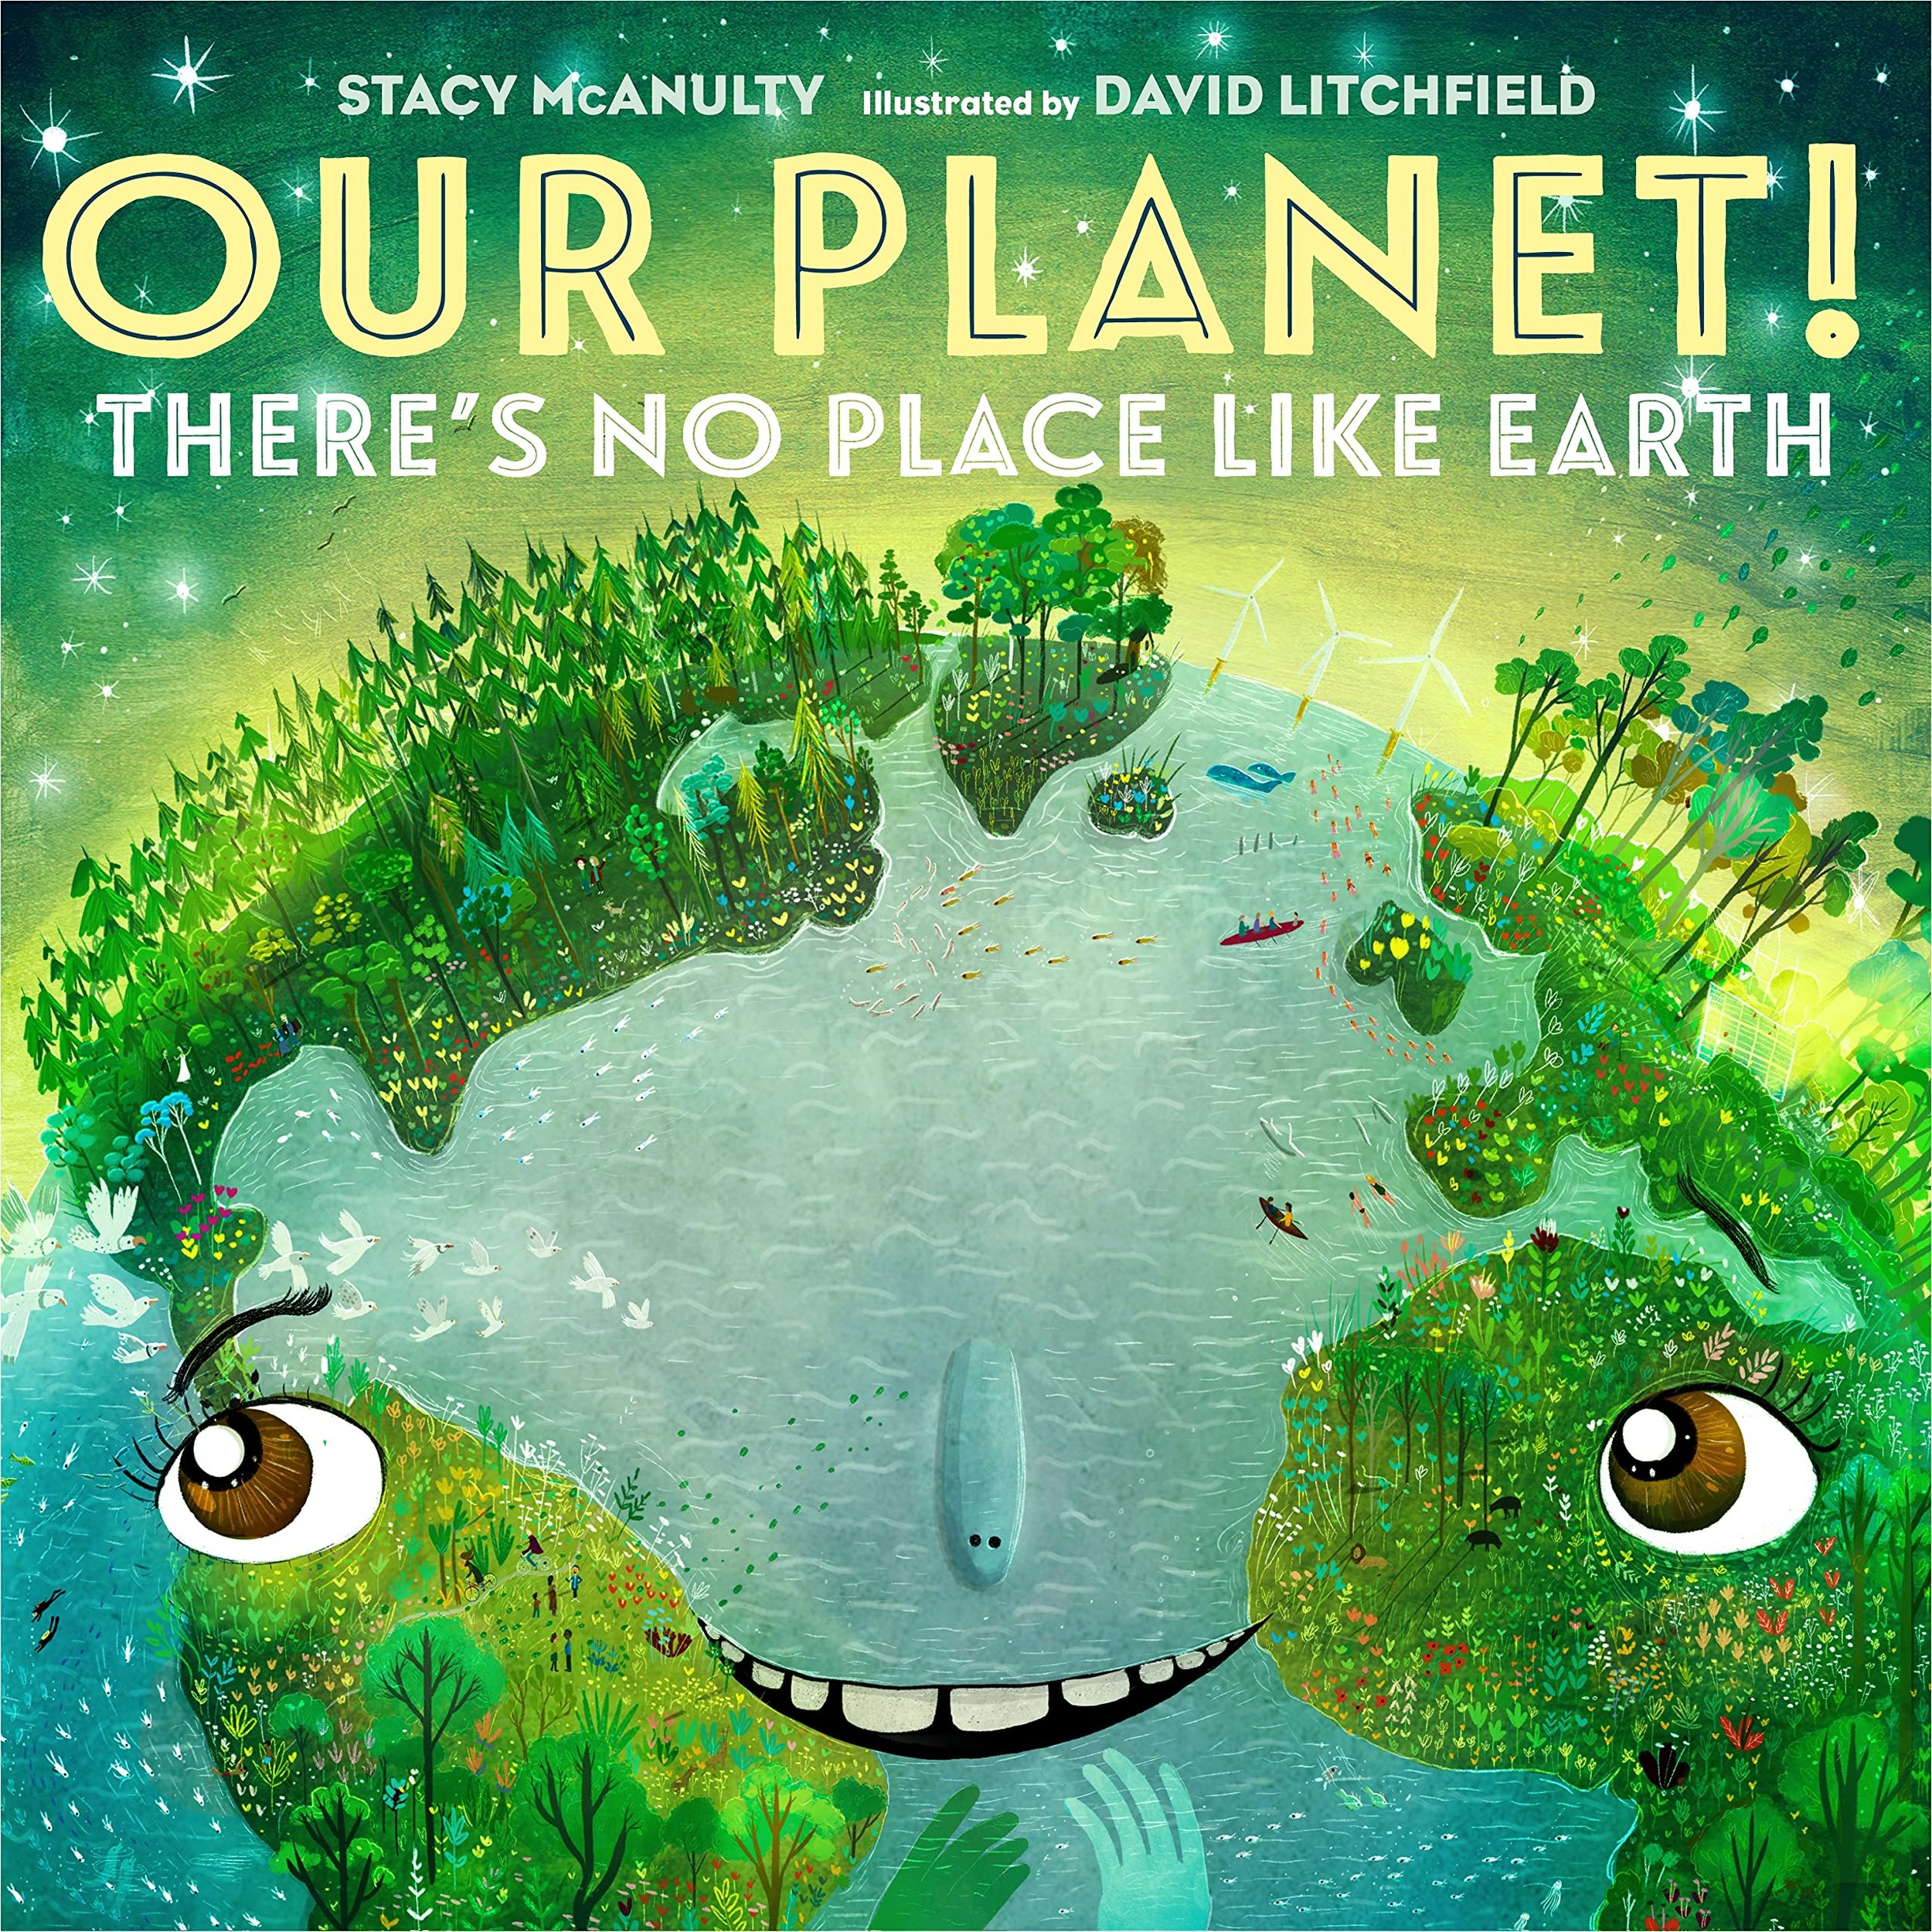 McAnulty, Stacy 2022_04 OUR PLANET! THERE'S NO PLACE LIKE EARTH - PB - LK.jpg